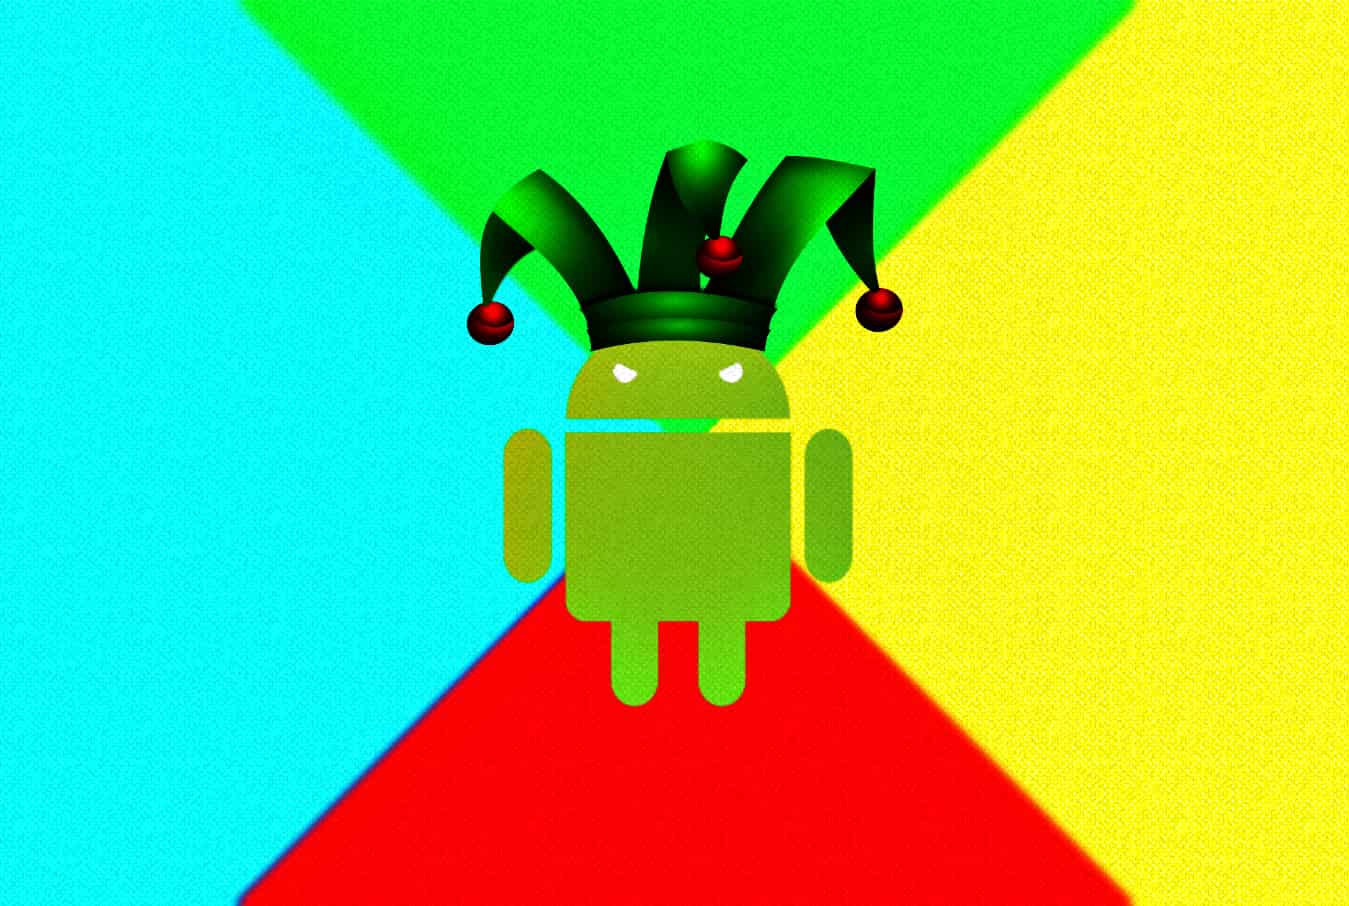 New variant of Joker malware found in Android apps on Play Store